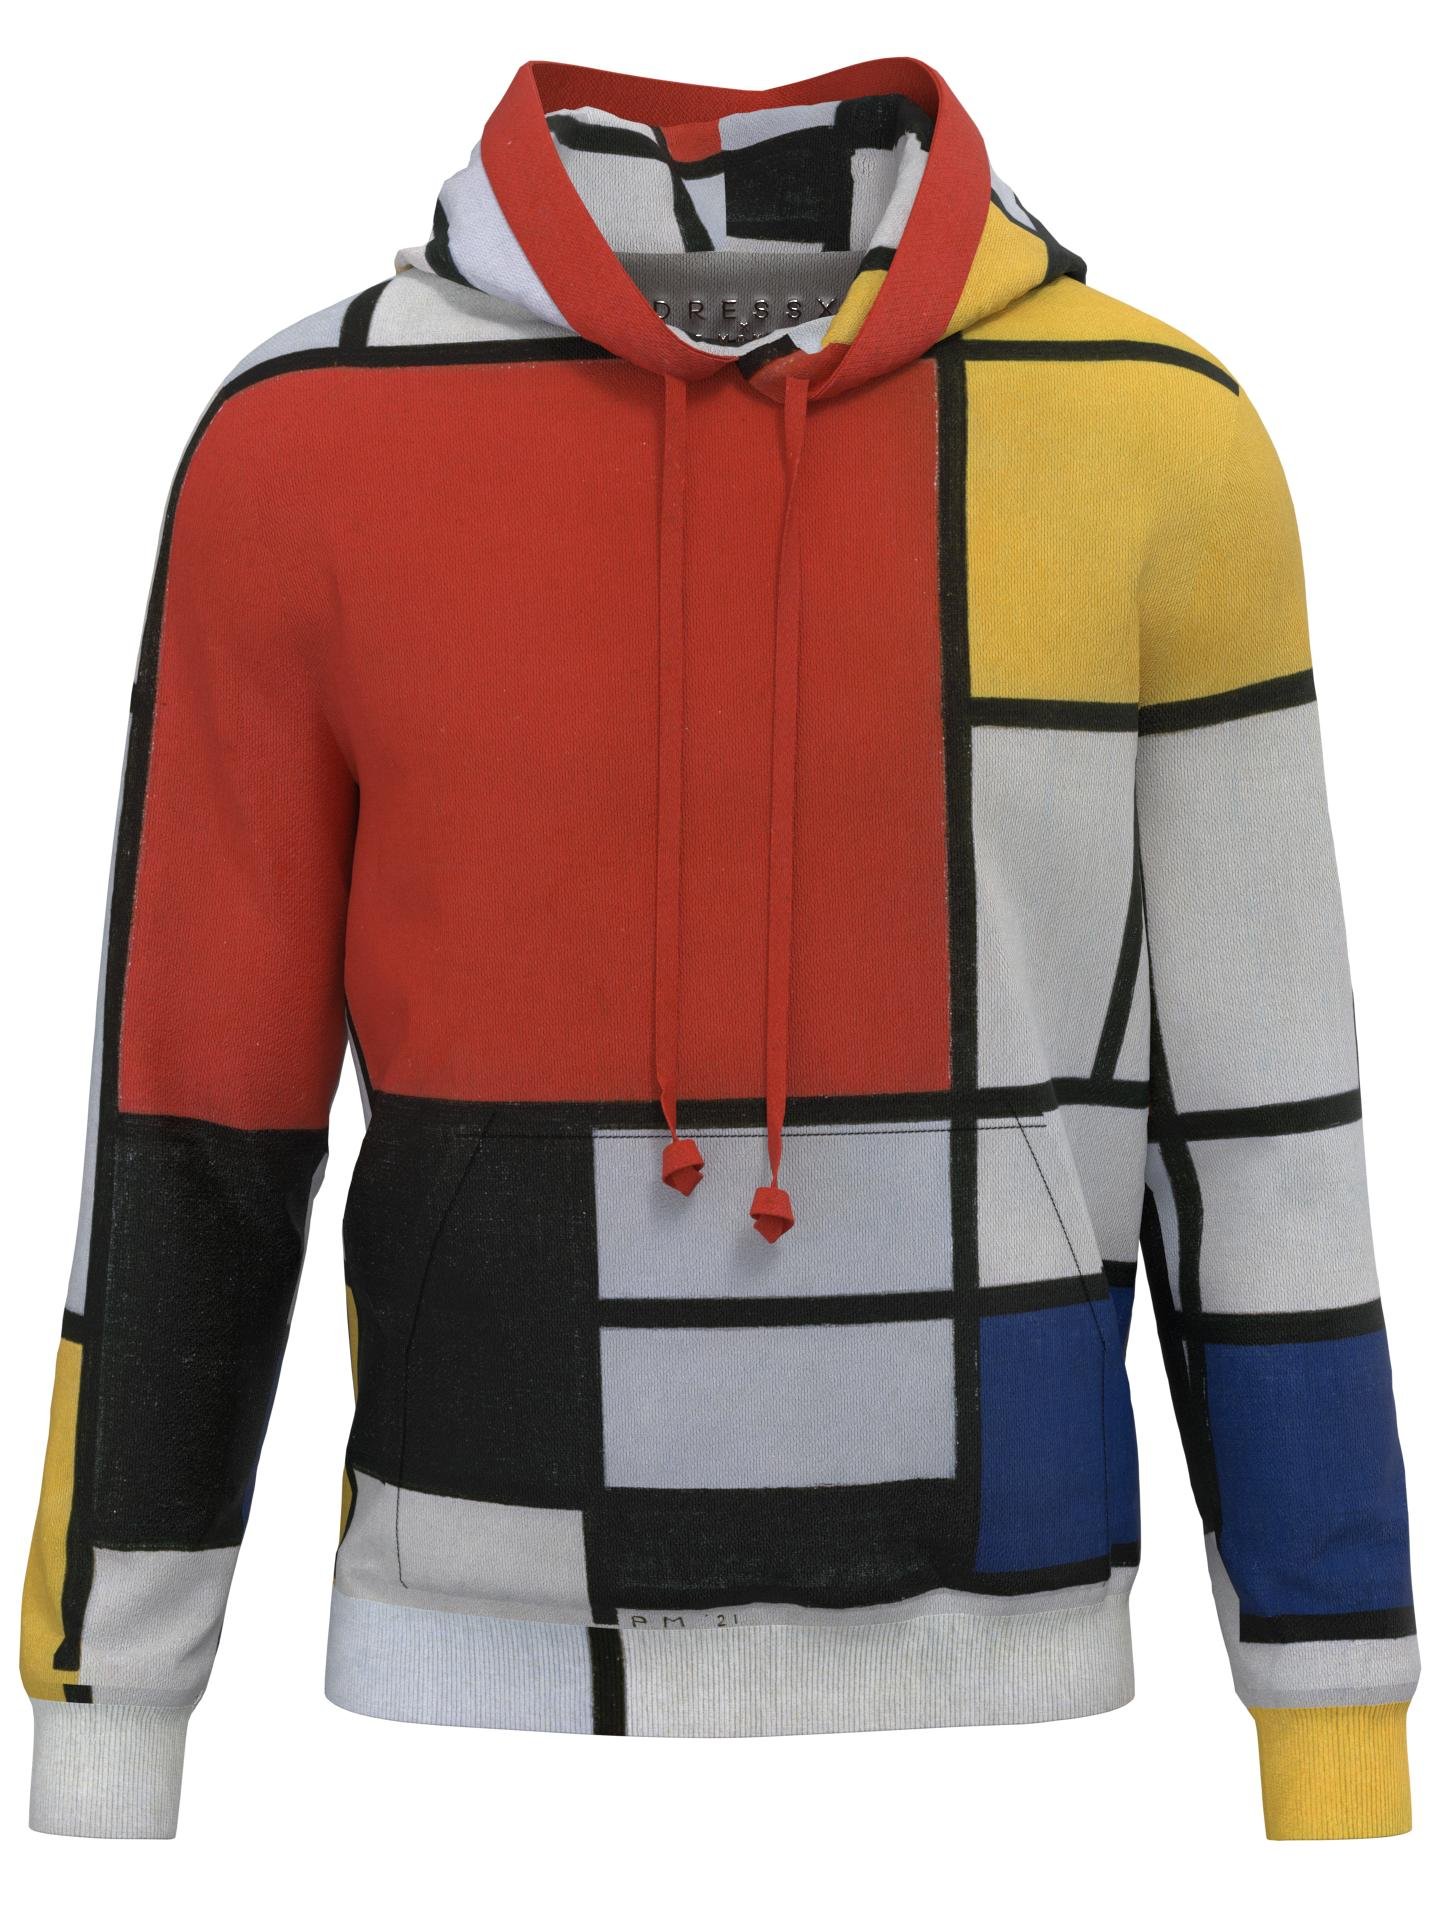 Hoodie-Composition with Red, Yellow, Blue and Black by DRESSX